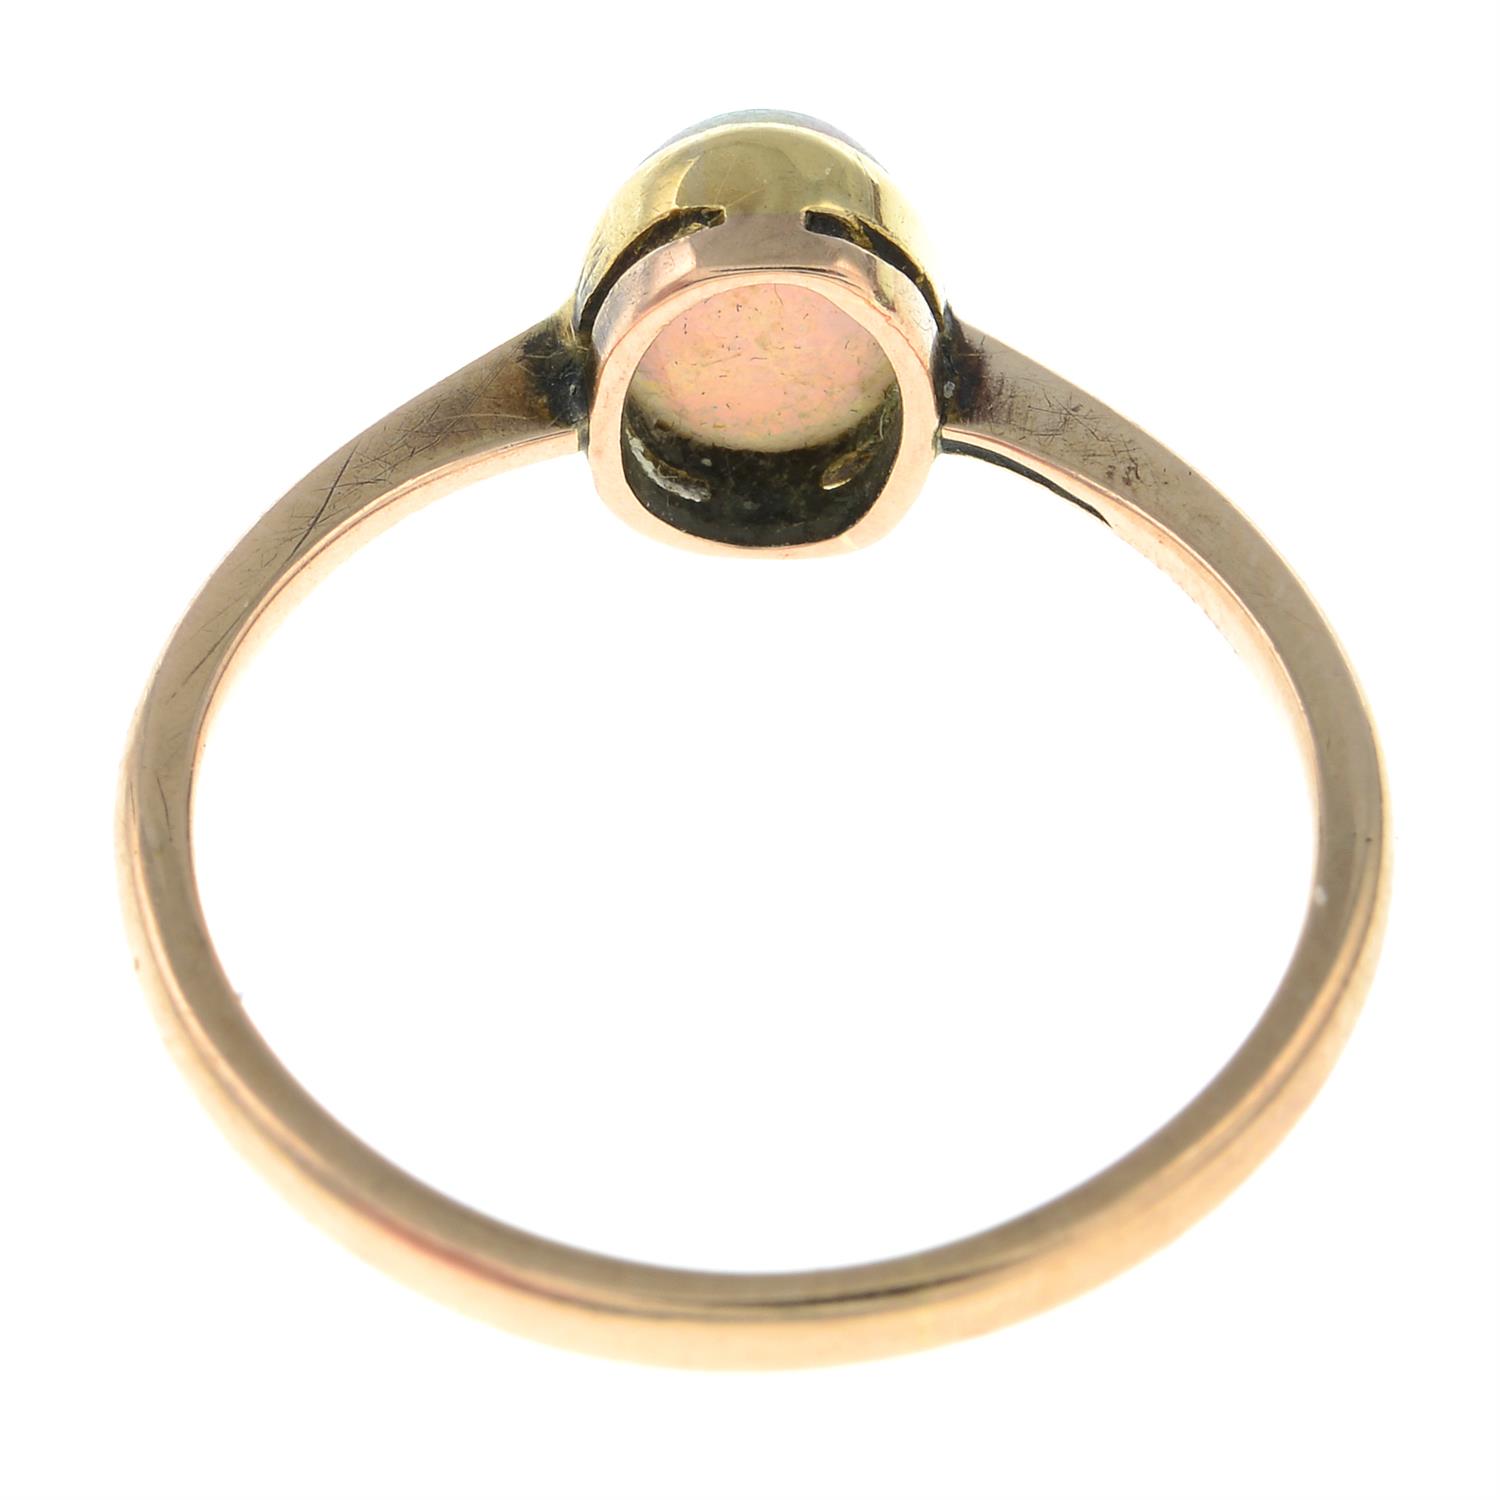 An early 20th century gold opal single-stone ring. - Image 2 of 2